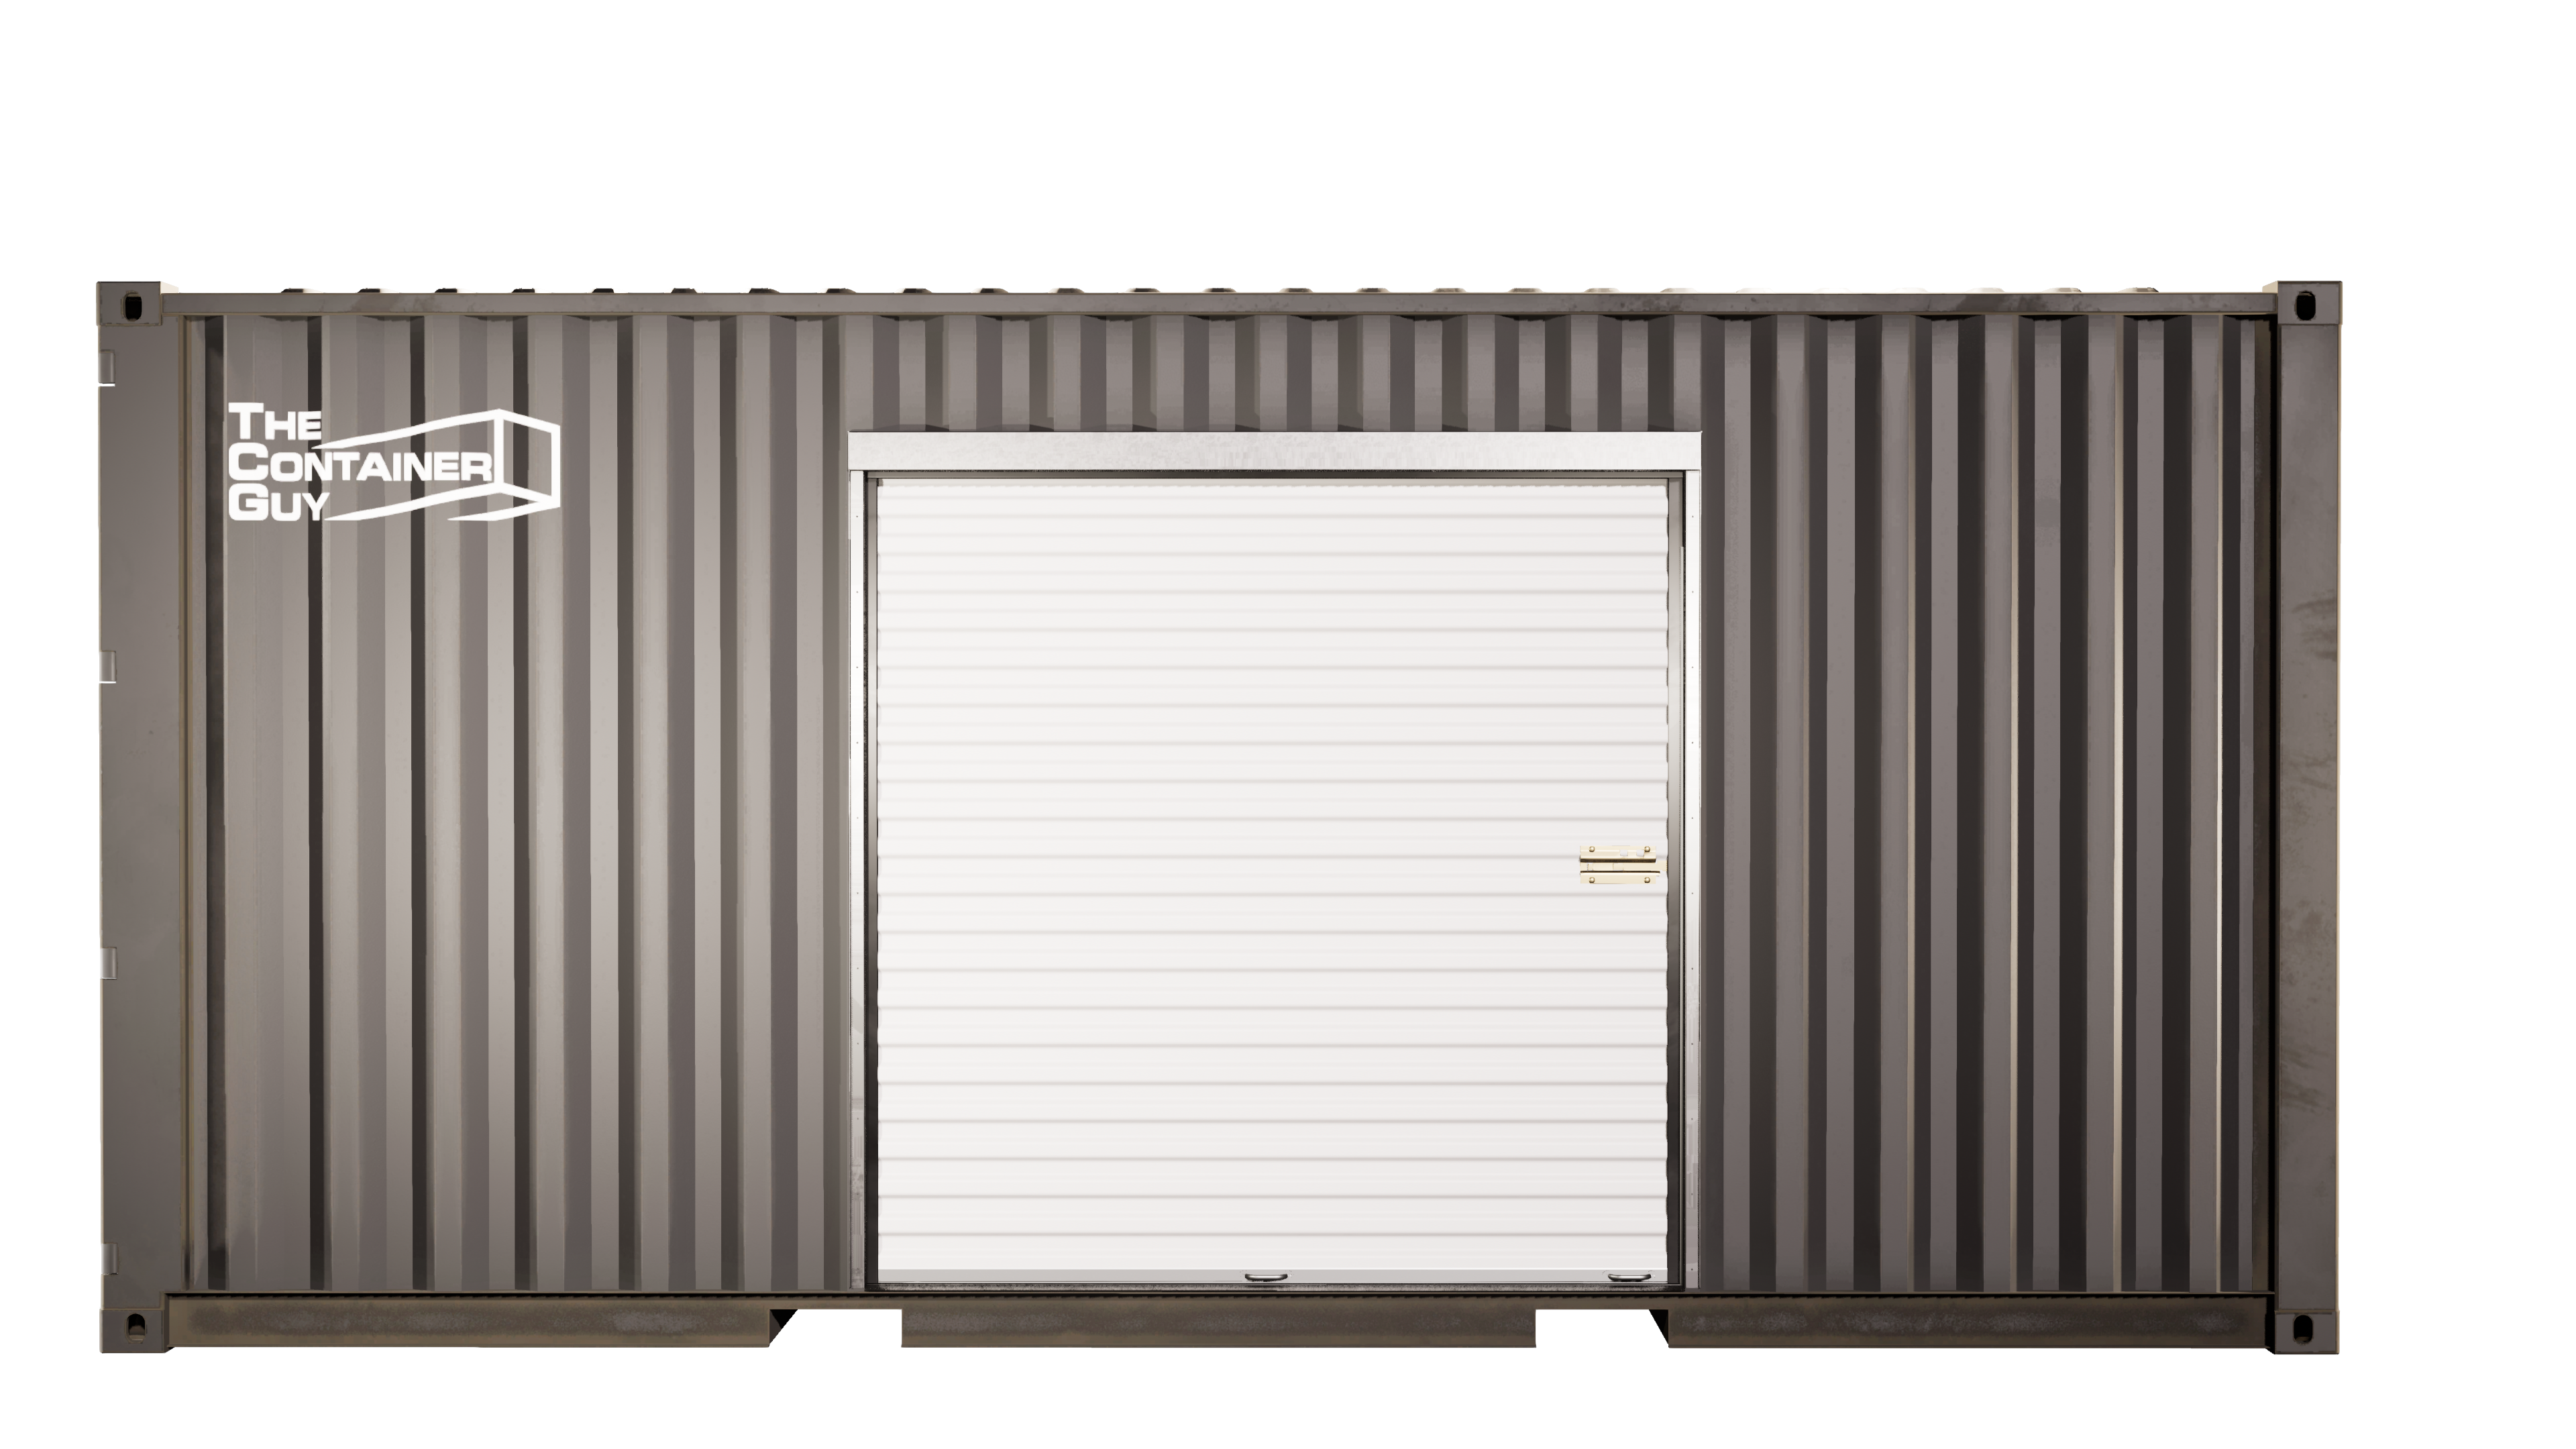 High Cube (9'6" Tall) Side Wall Roll Up Door Framing Kits - Door Not Included (Please contact us before placing order so we can provide accurate shipping quote)